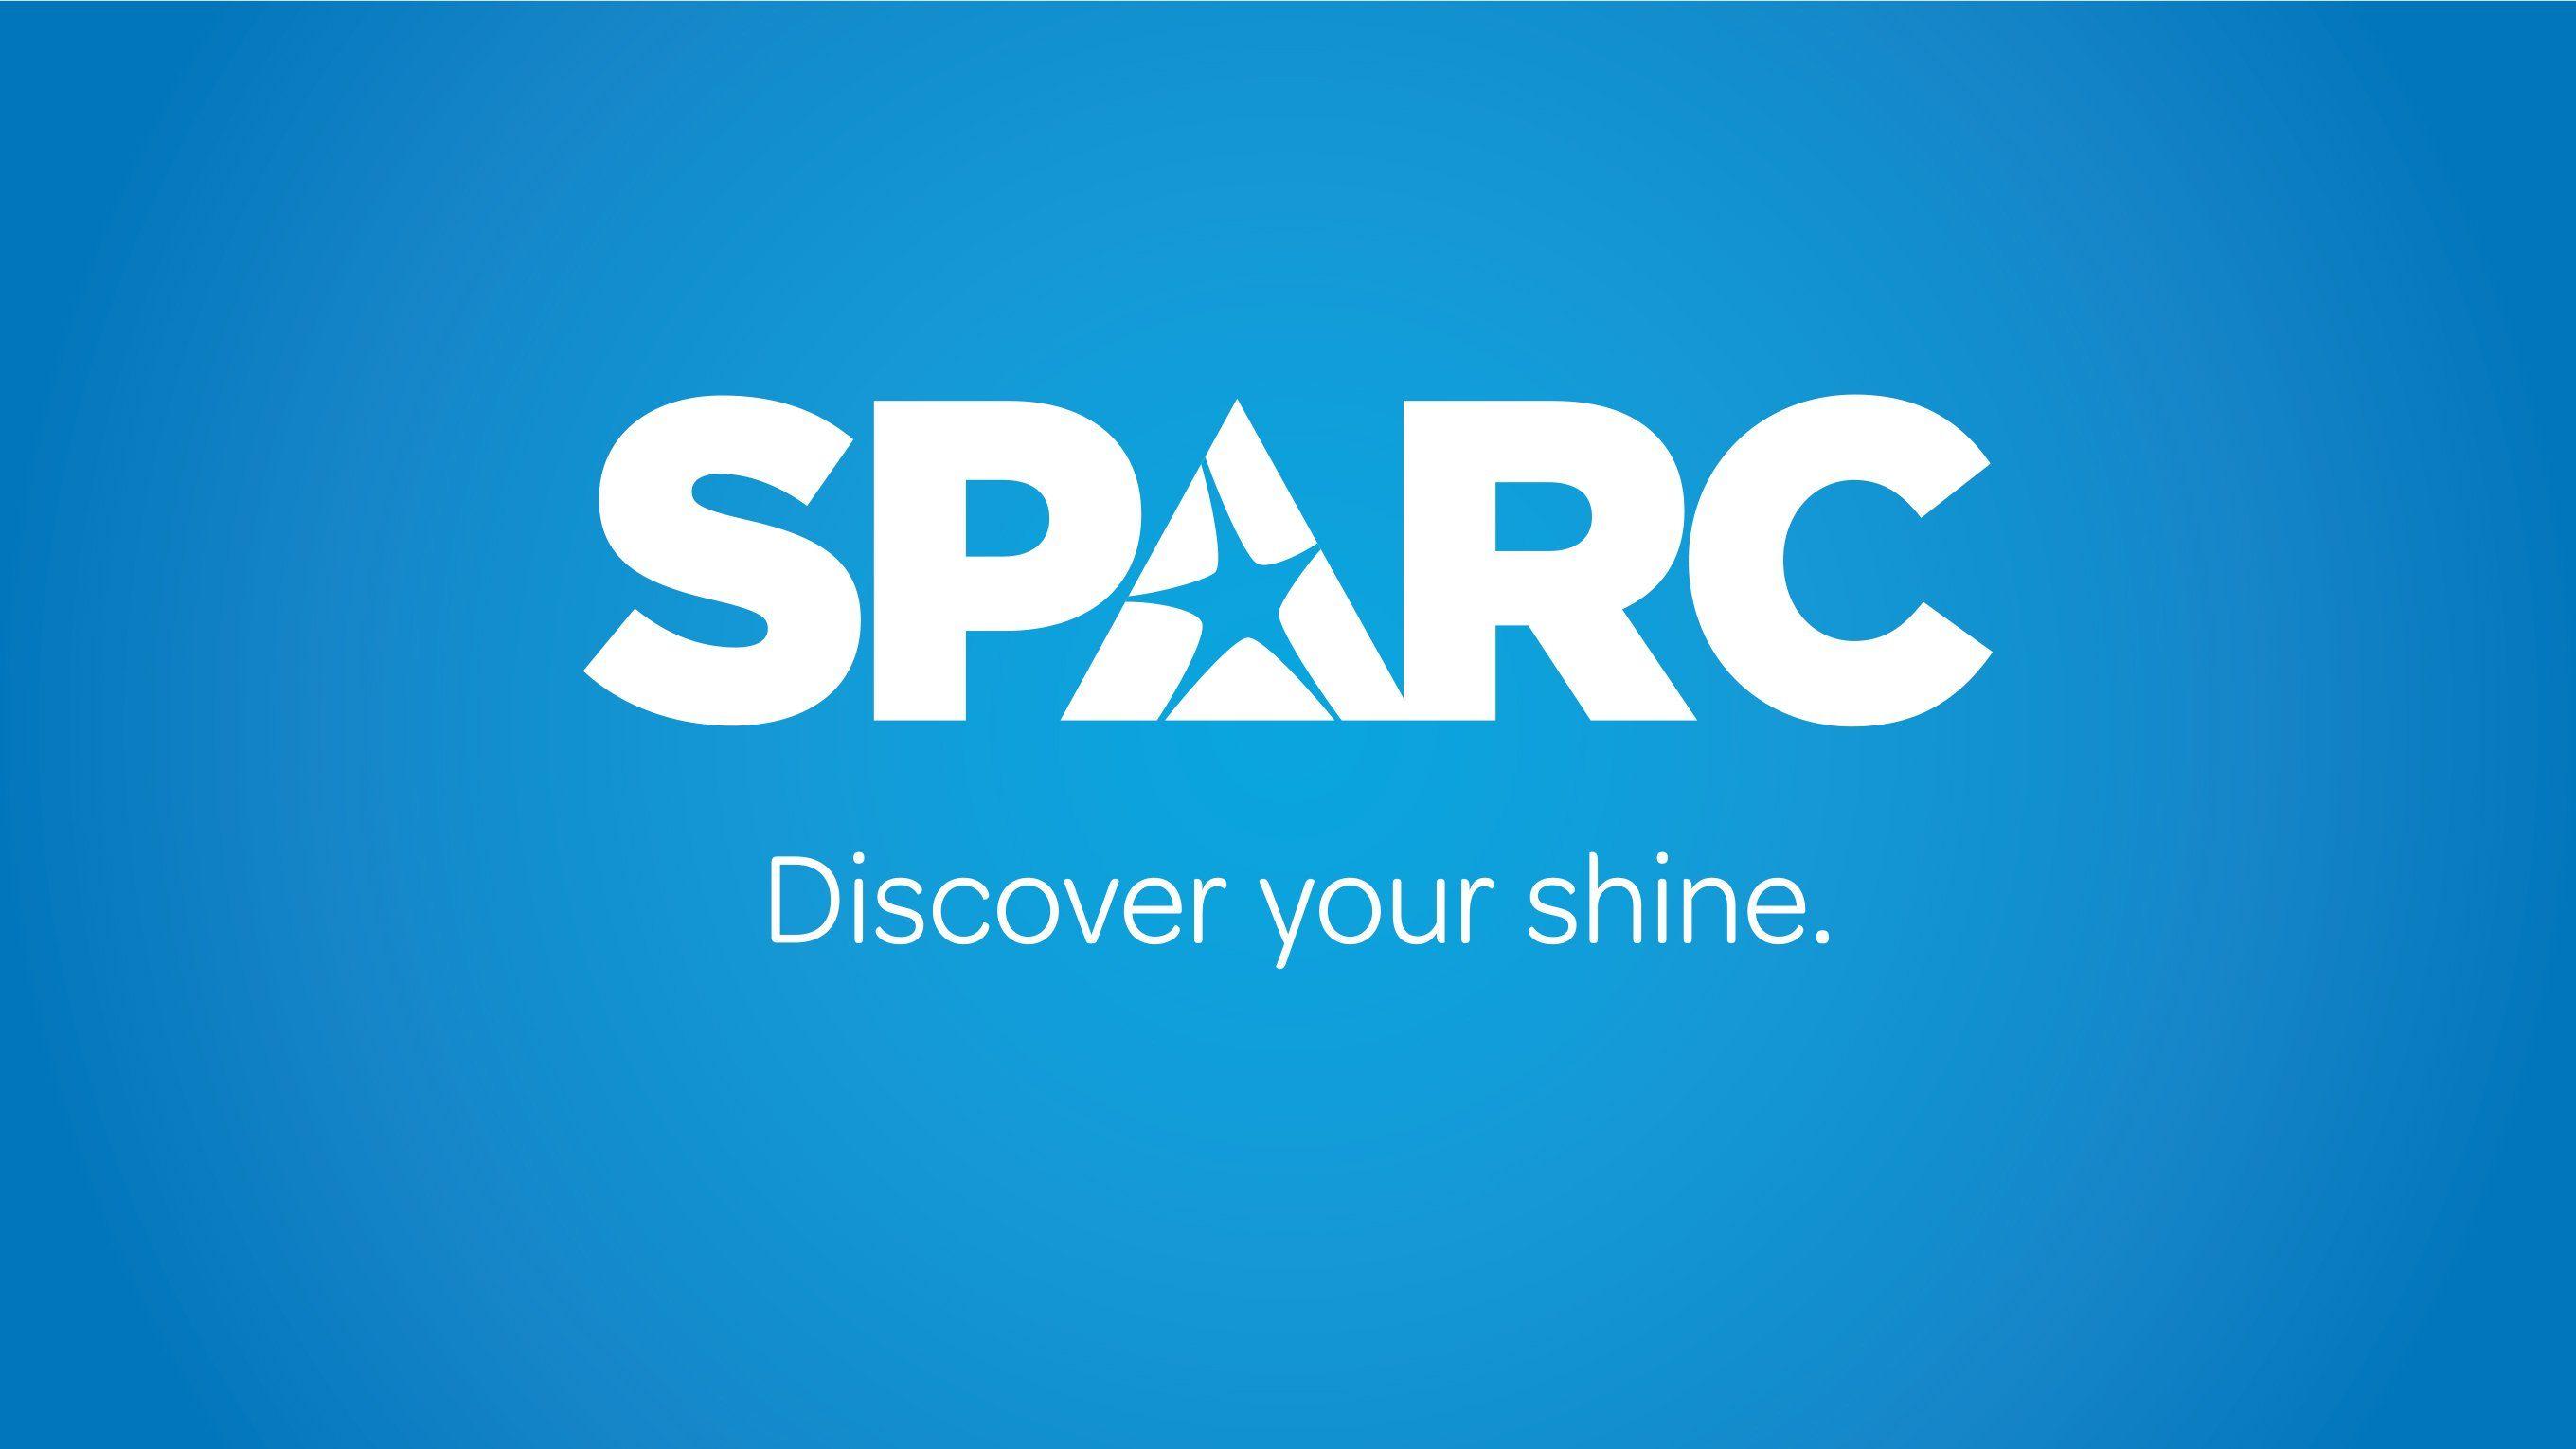 SPARC Logo - Fable - Tell Stories. Share Adventures. Build Legends.